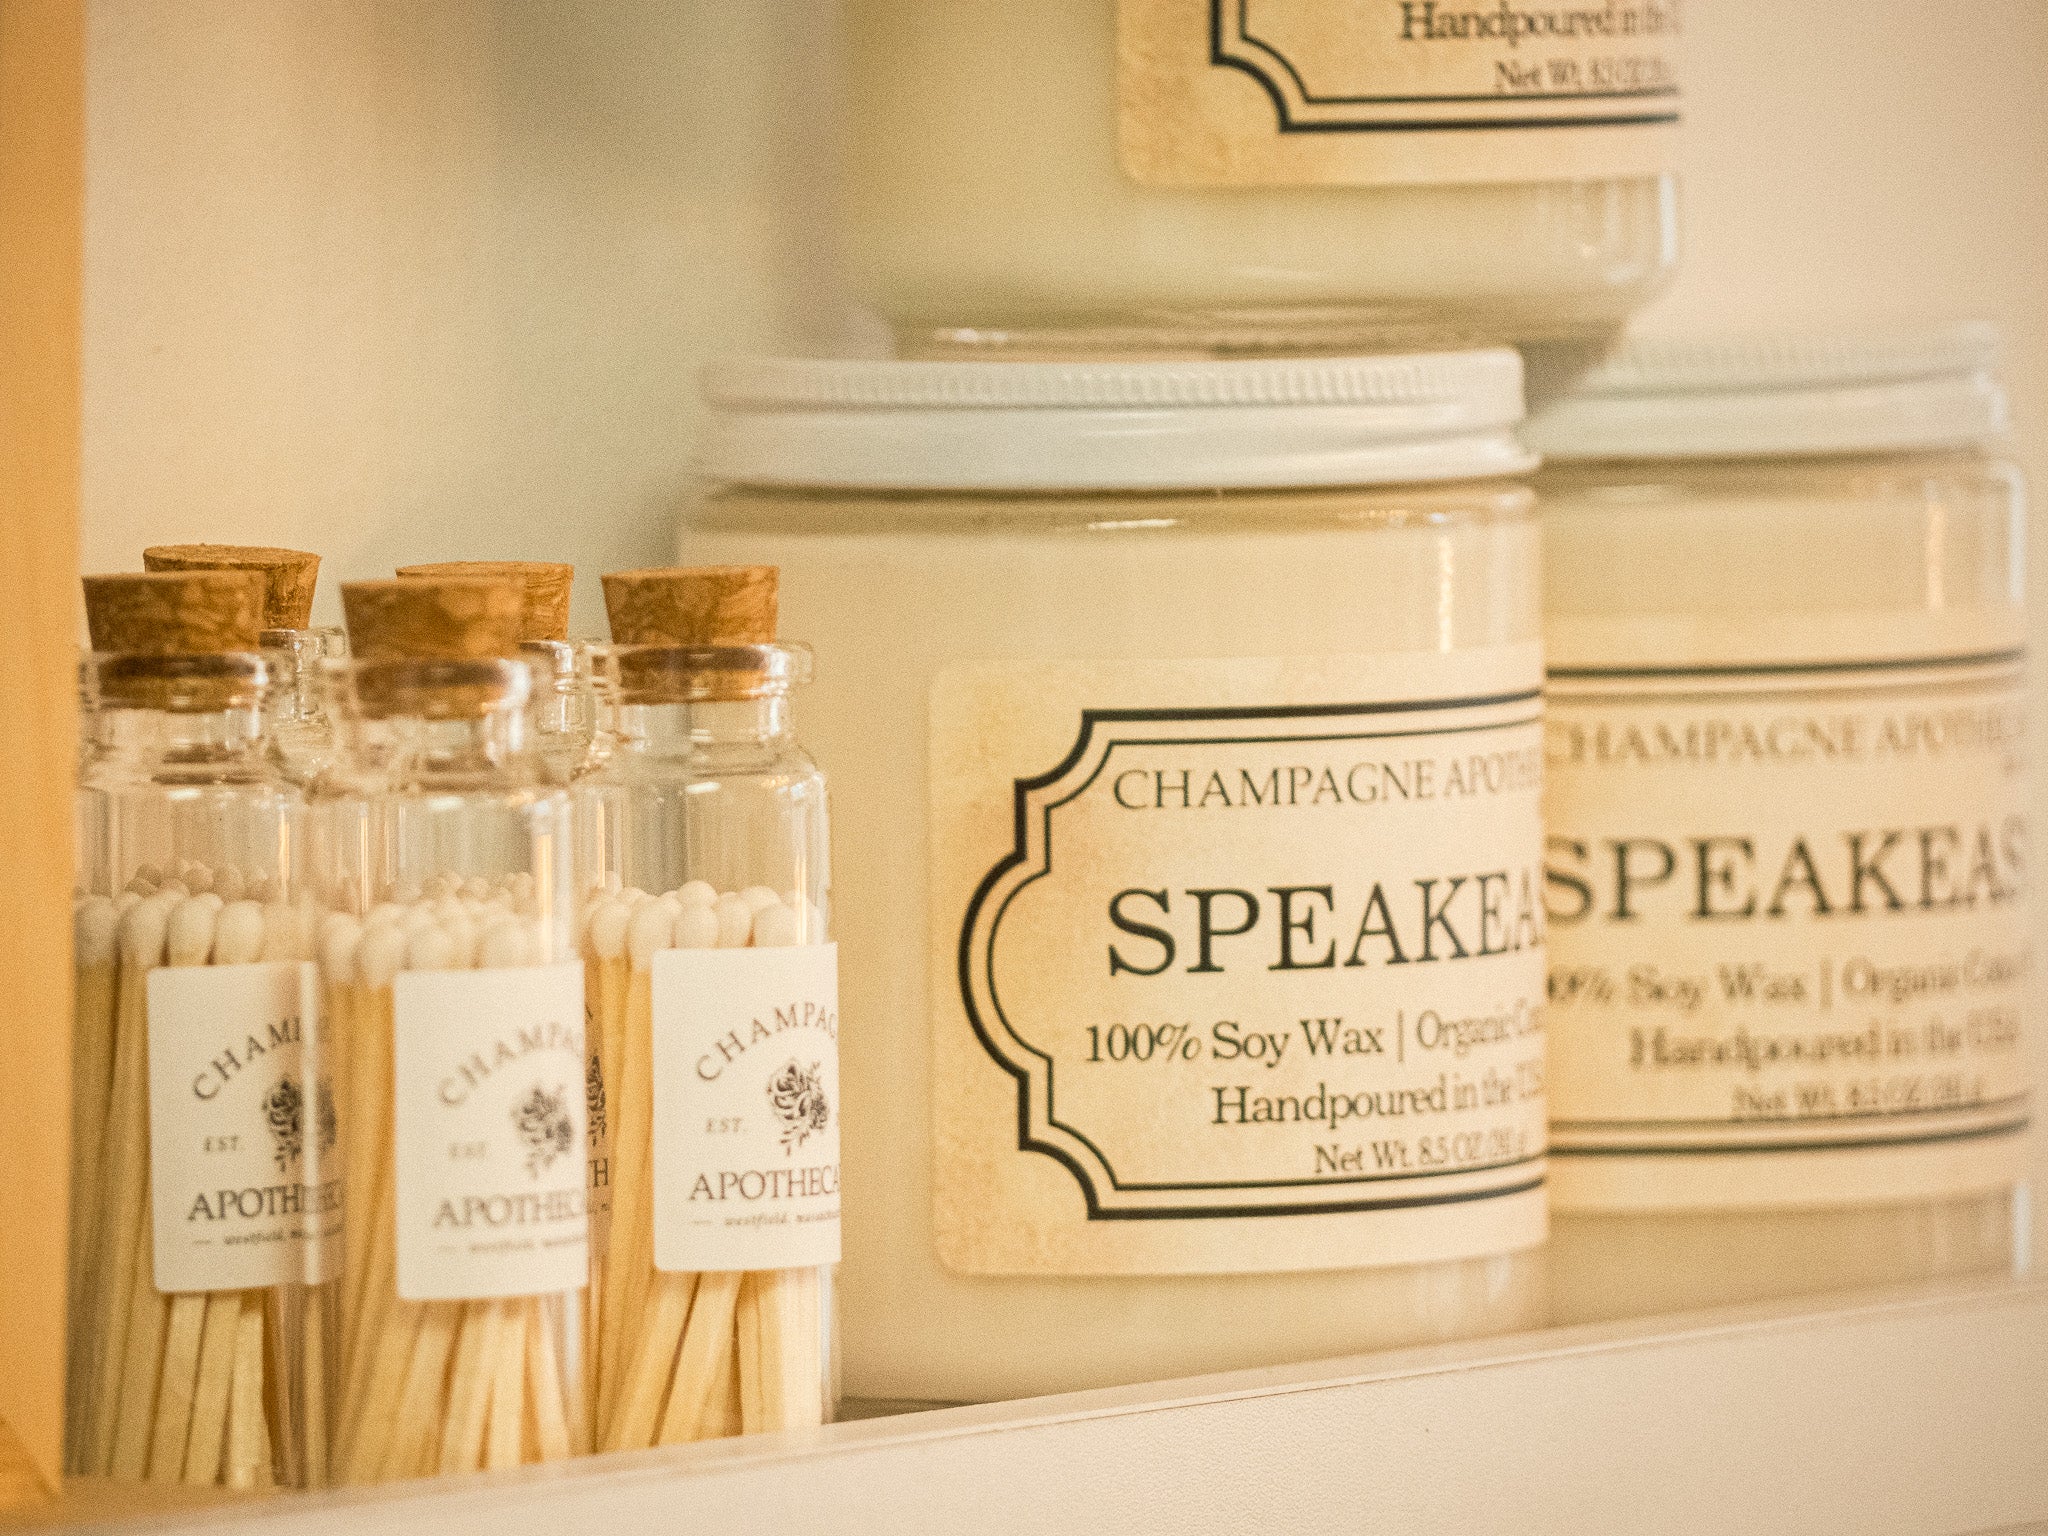 Our signature apothecary matches are a great way to light your favorite Champagne Apothecary 100% Soy Wax Candles! Super cute in their little apothecary bottle. 100% wood stick with a white tip.